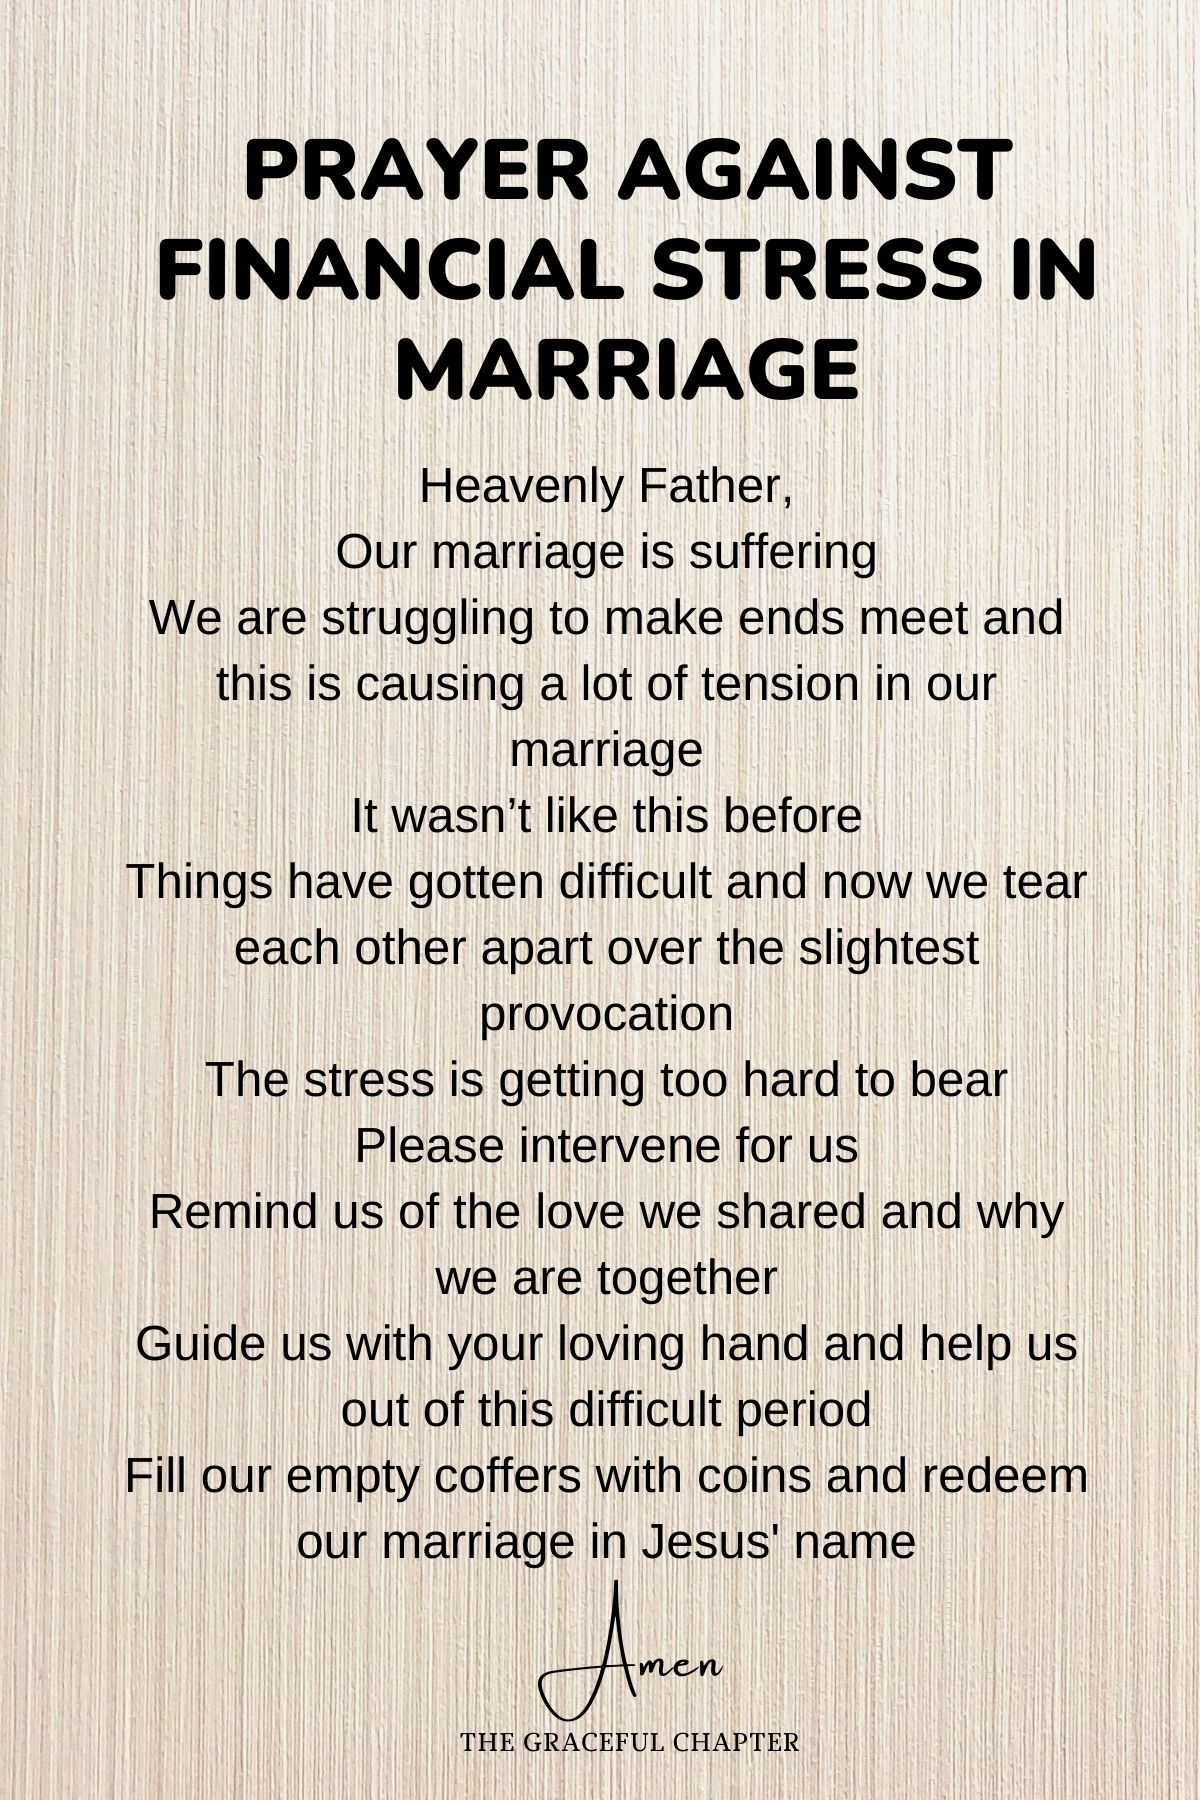 Prayer against financial stress in marriage